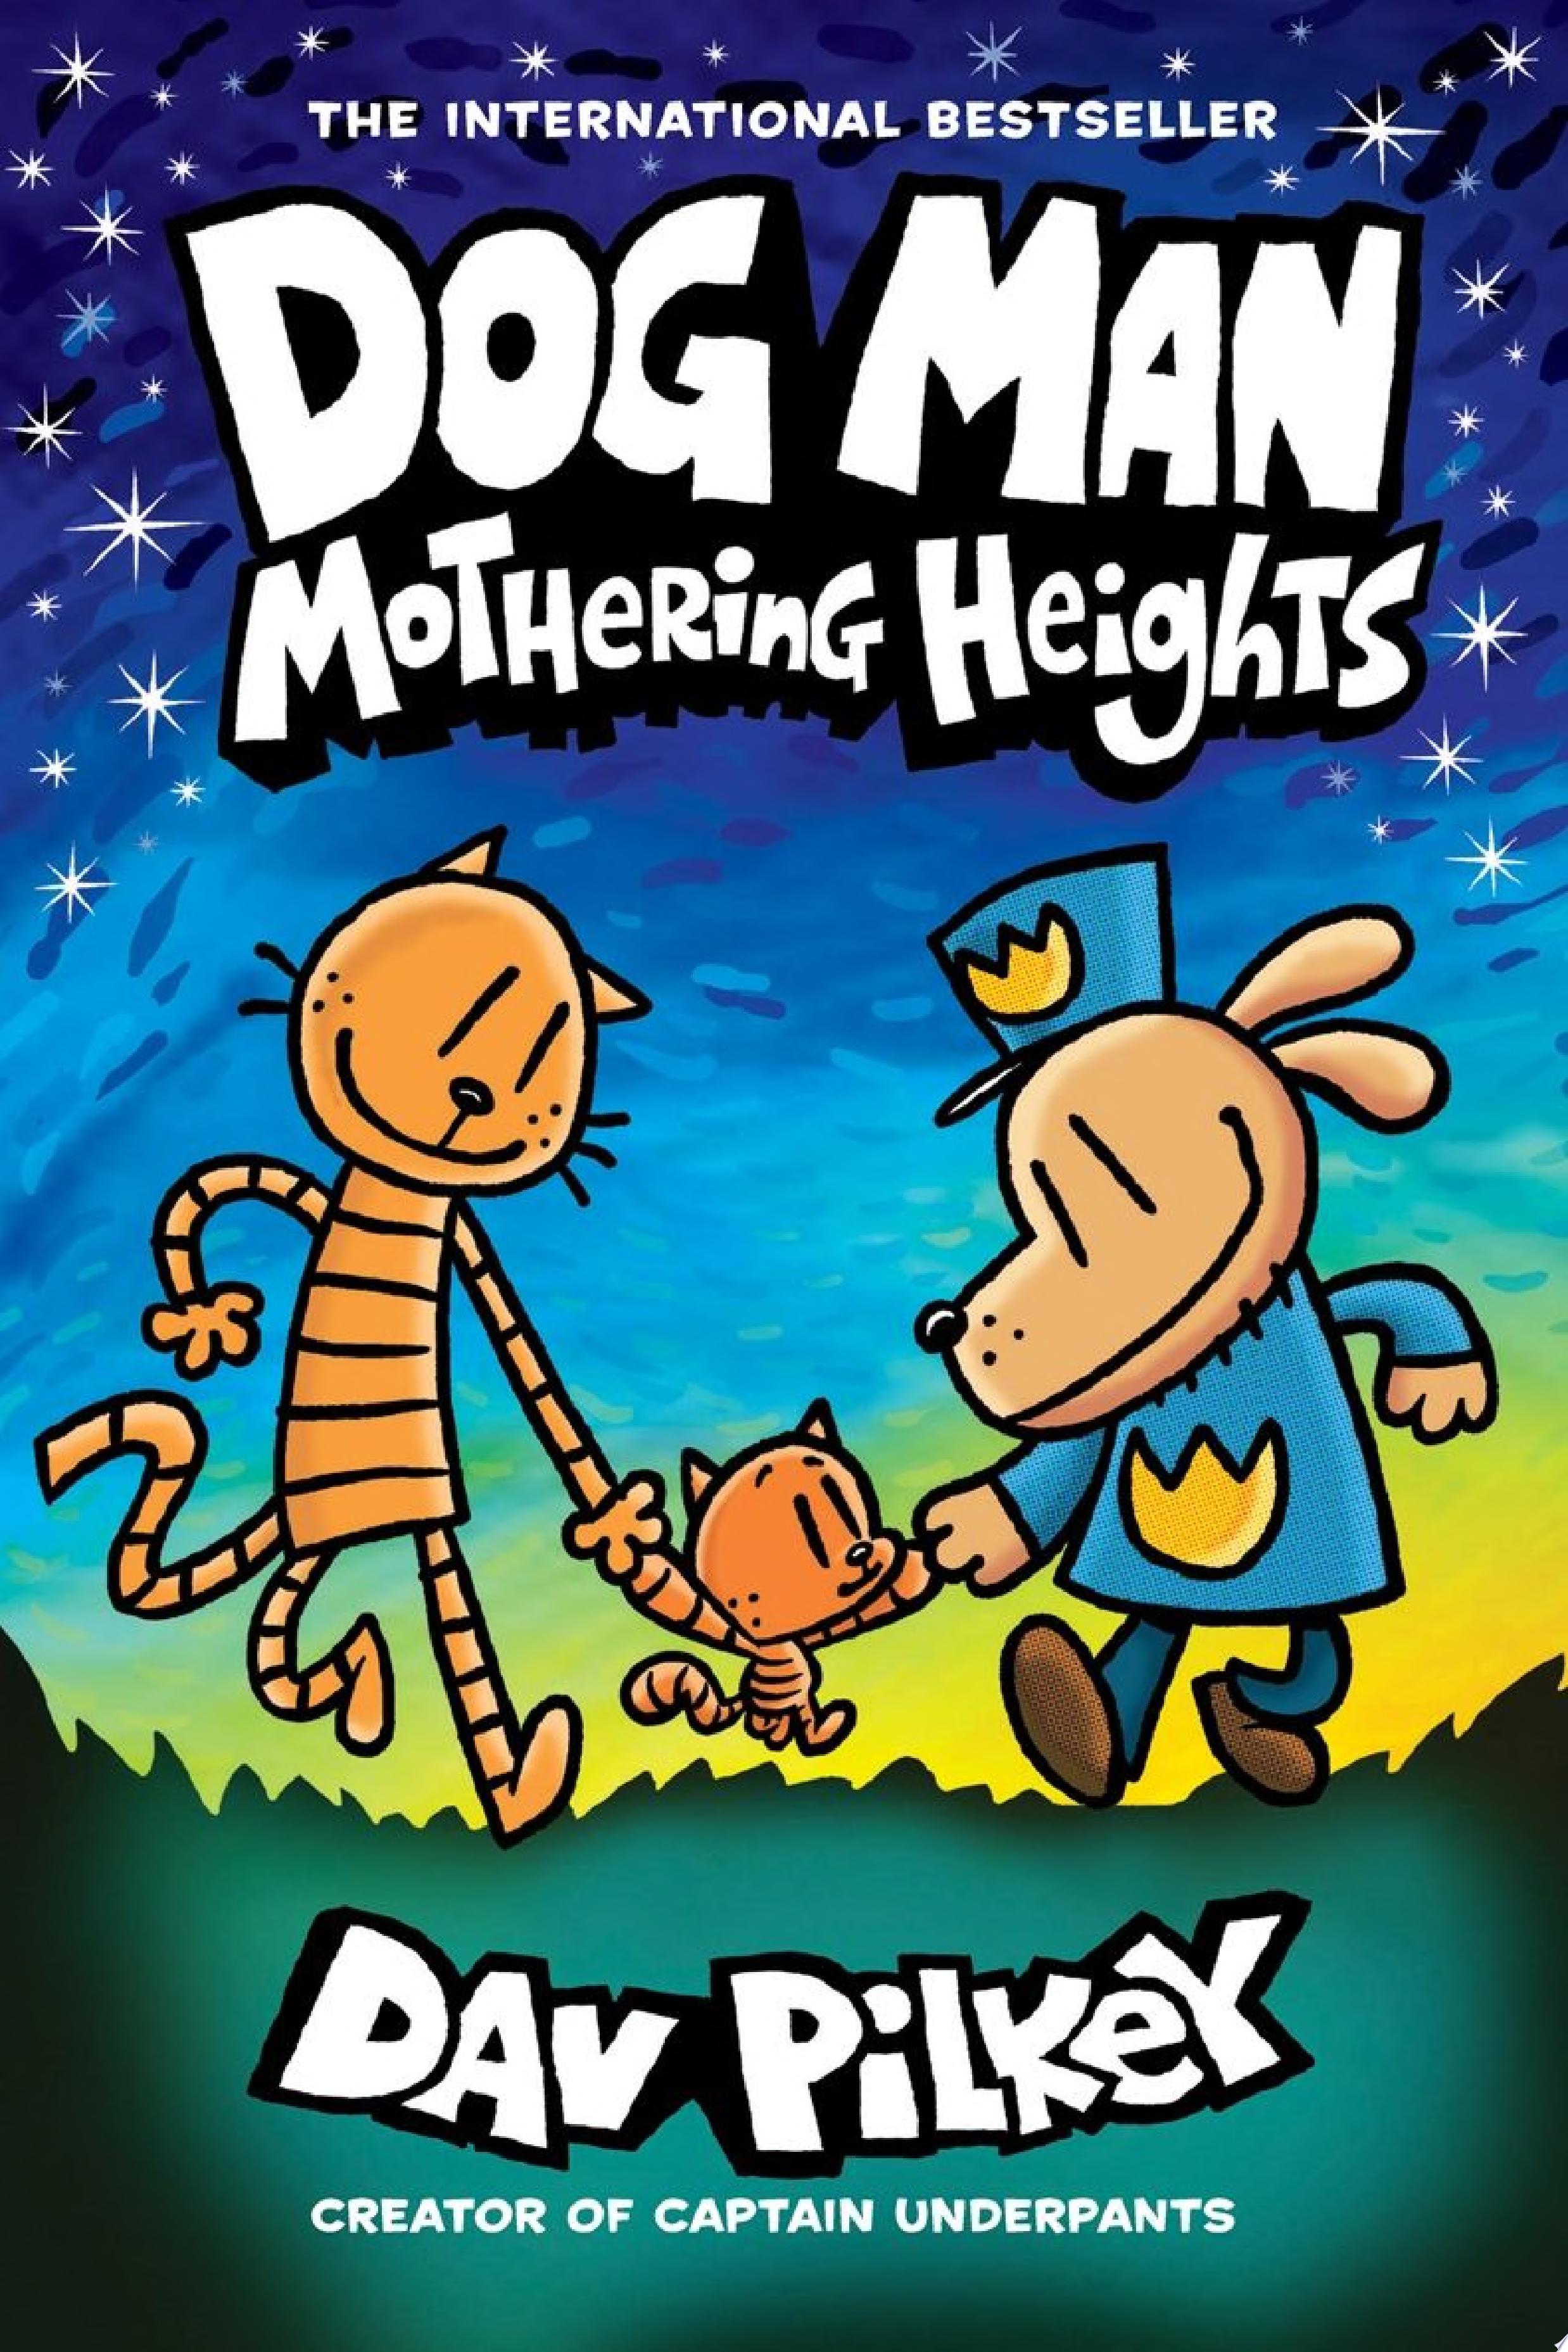 Image for "Dog Man: Mothering Heights: From the Creator of Captain Underpants (Dog Man #10)"